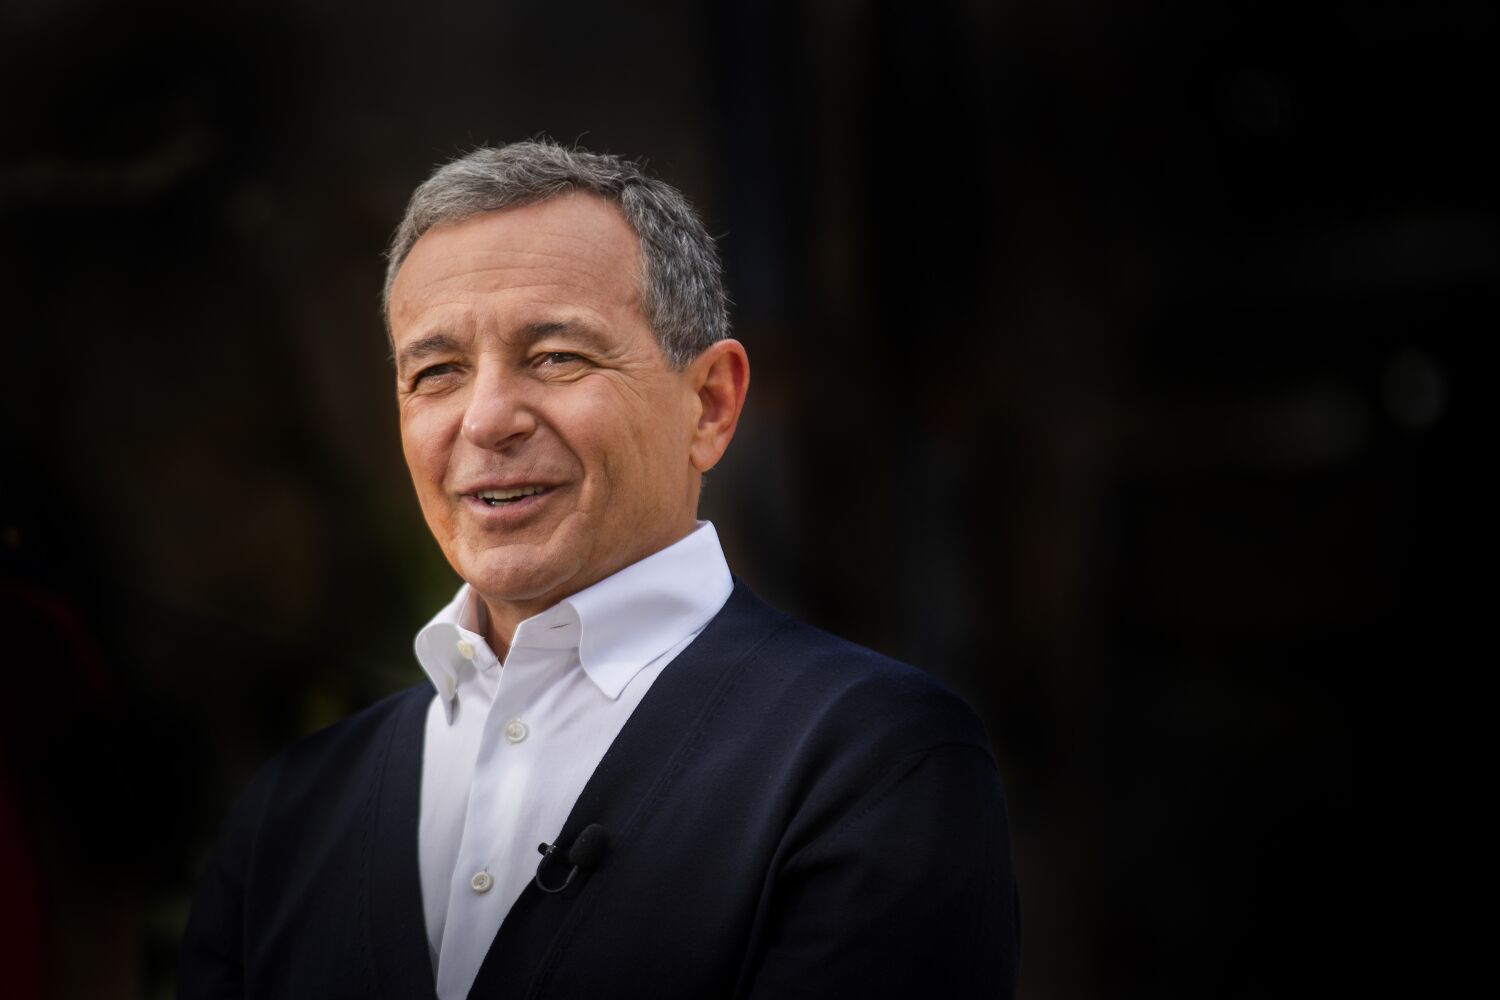 Bob Iger orders Disney employees back to the office four days a week